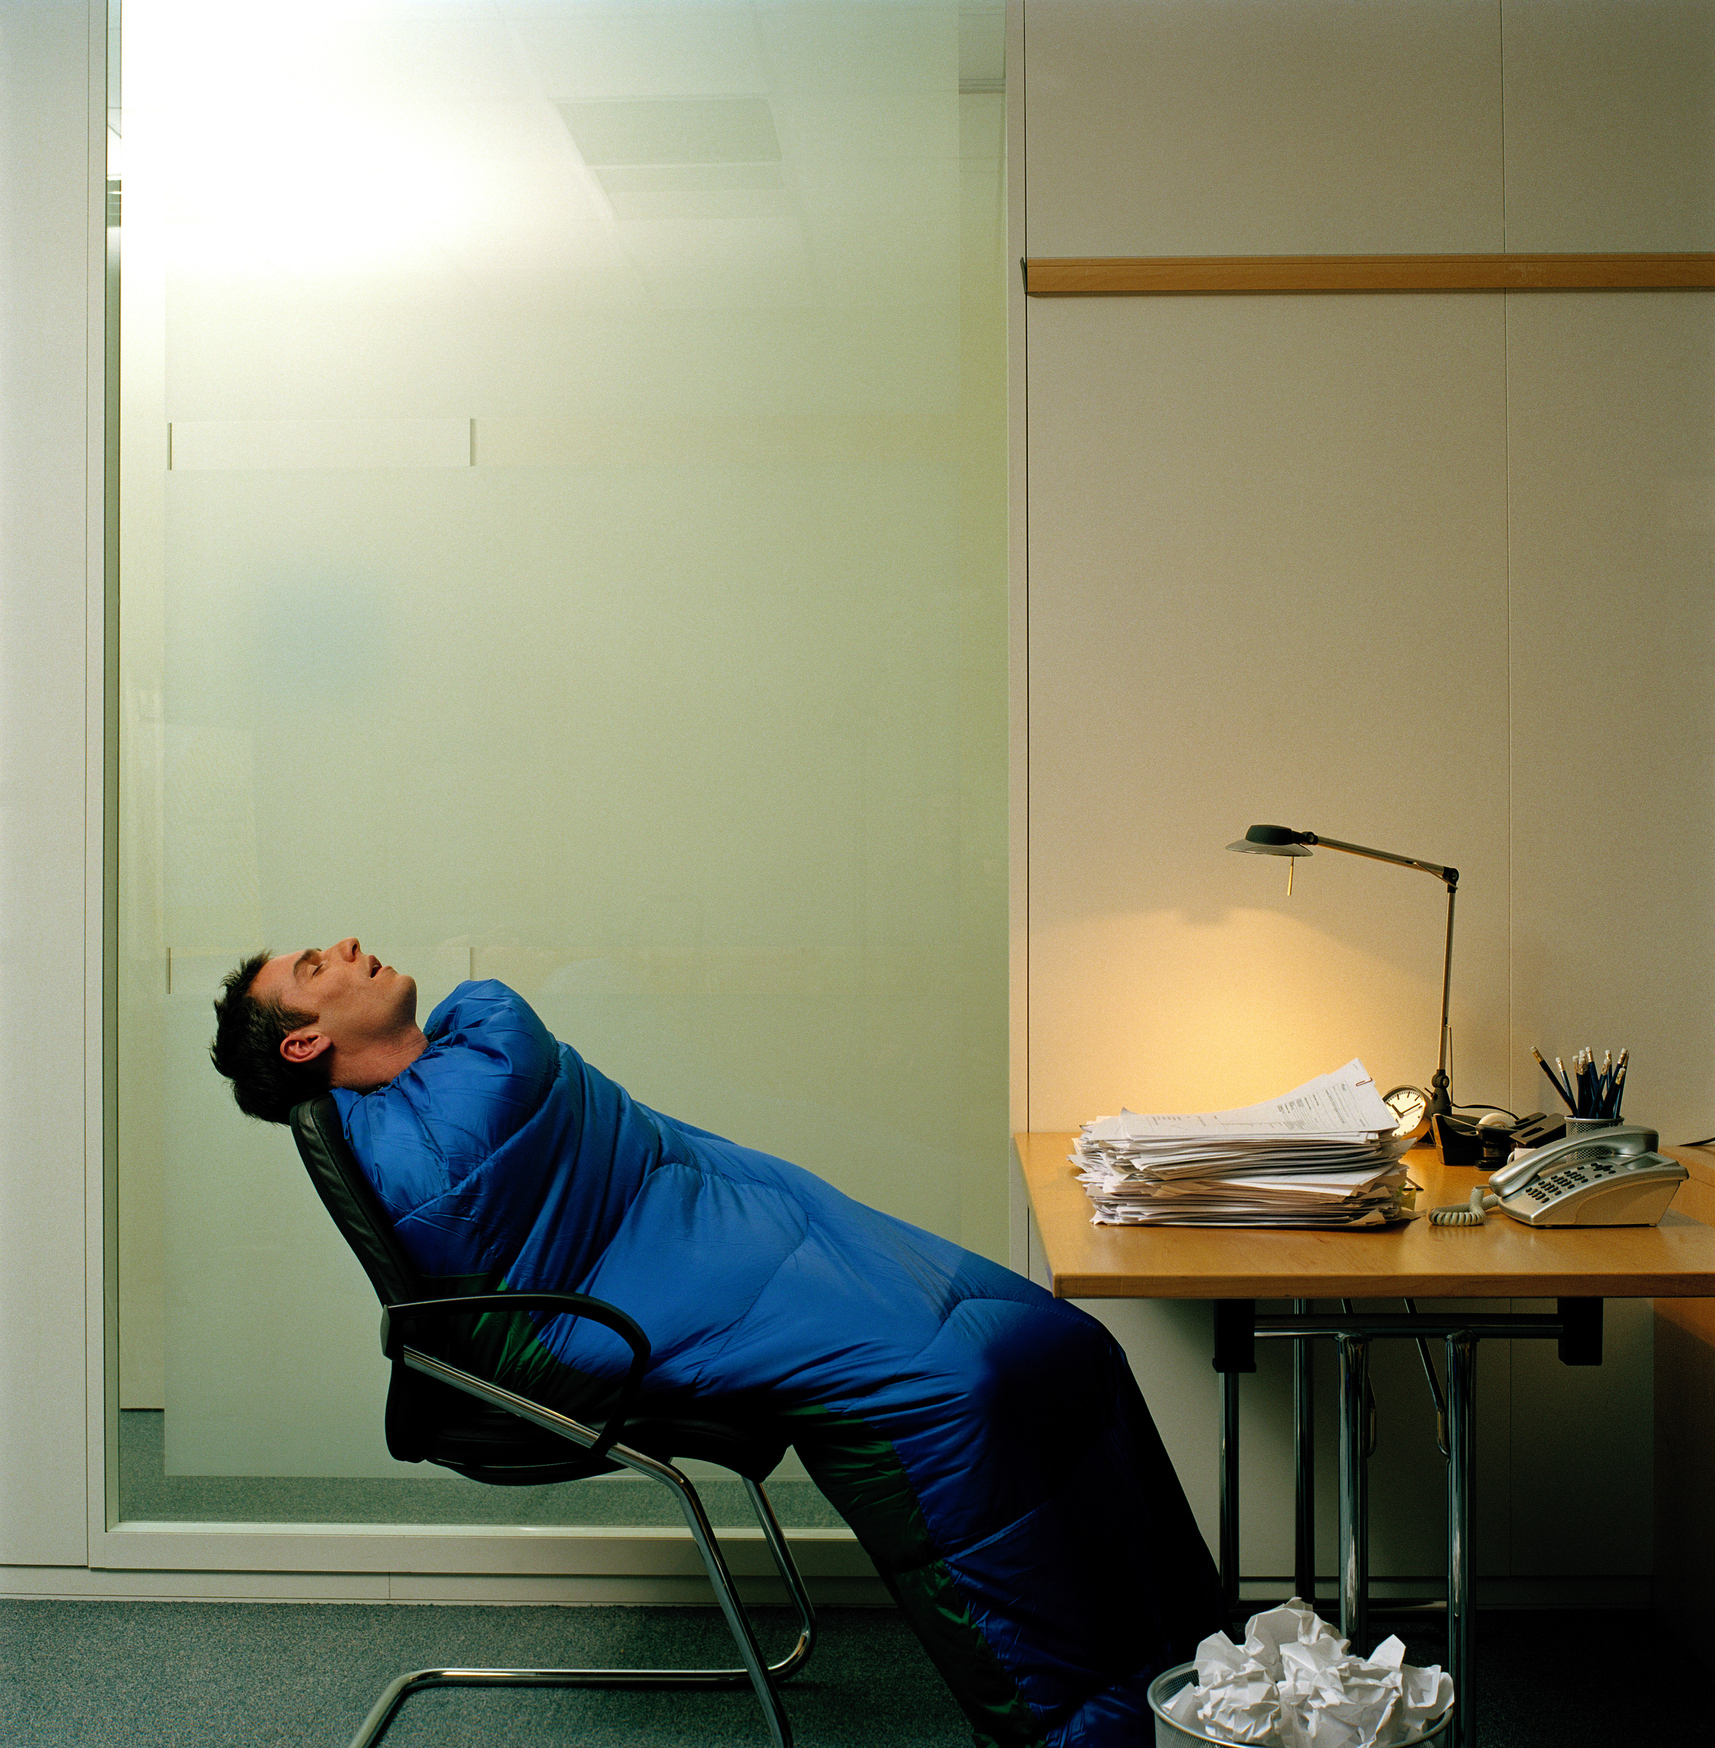 A man sleeping in an office chair while wrapped in a sleeping bag